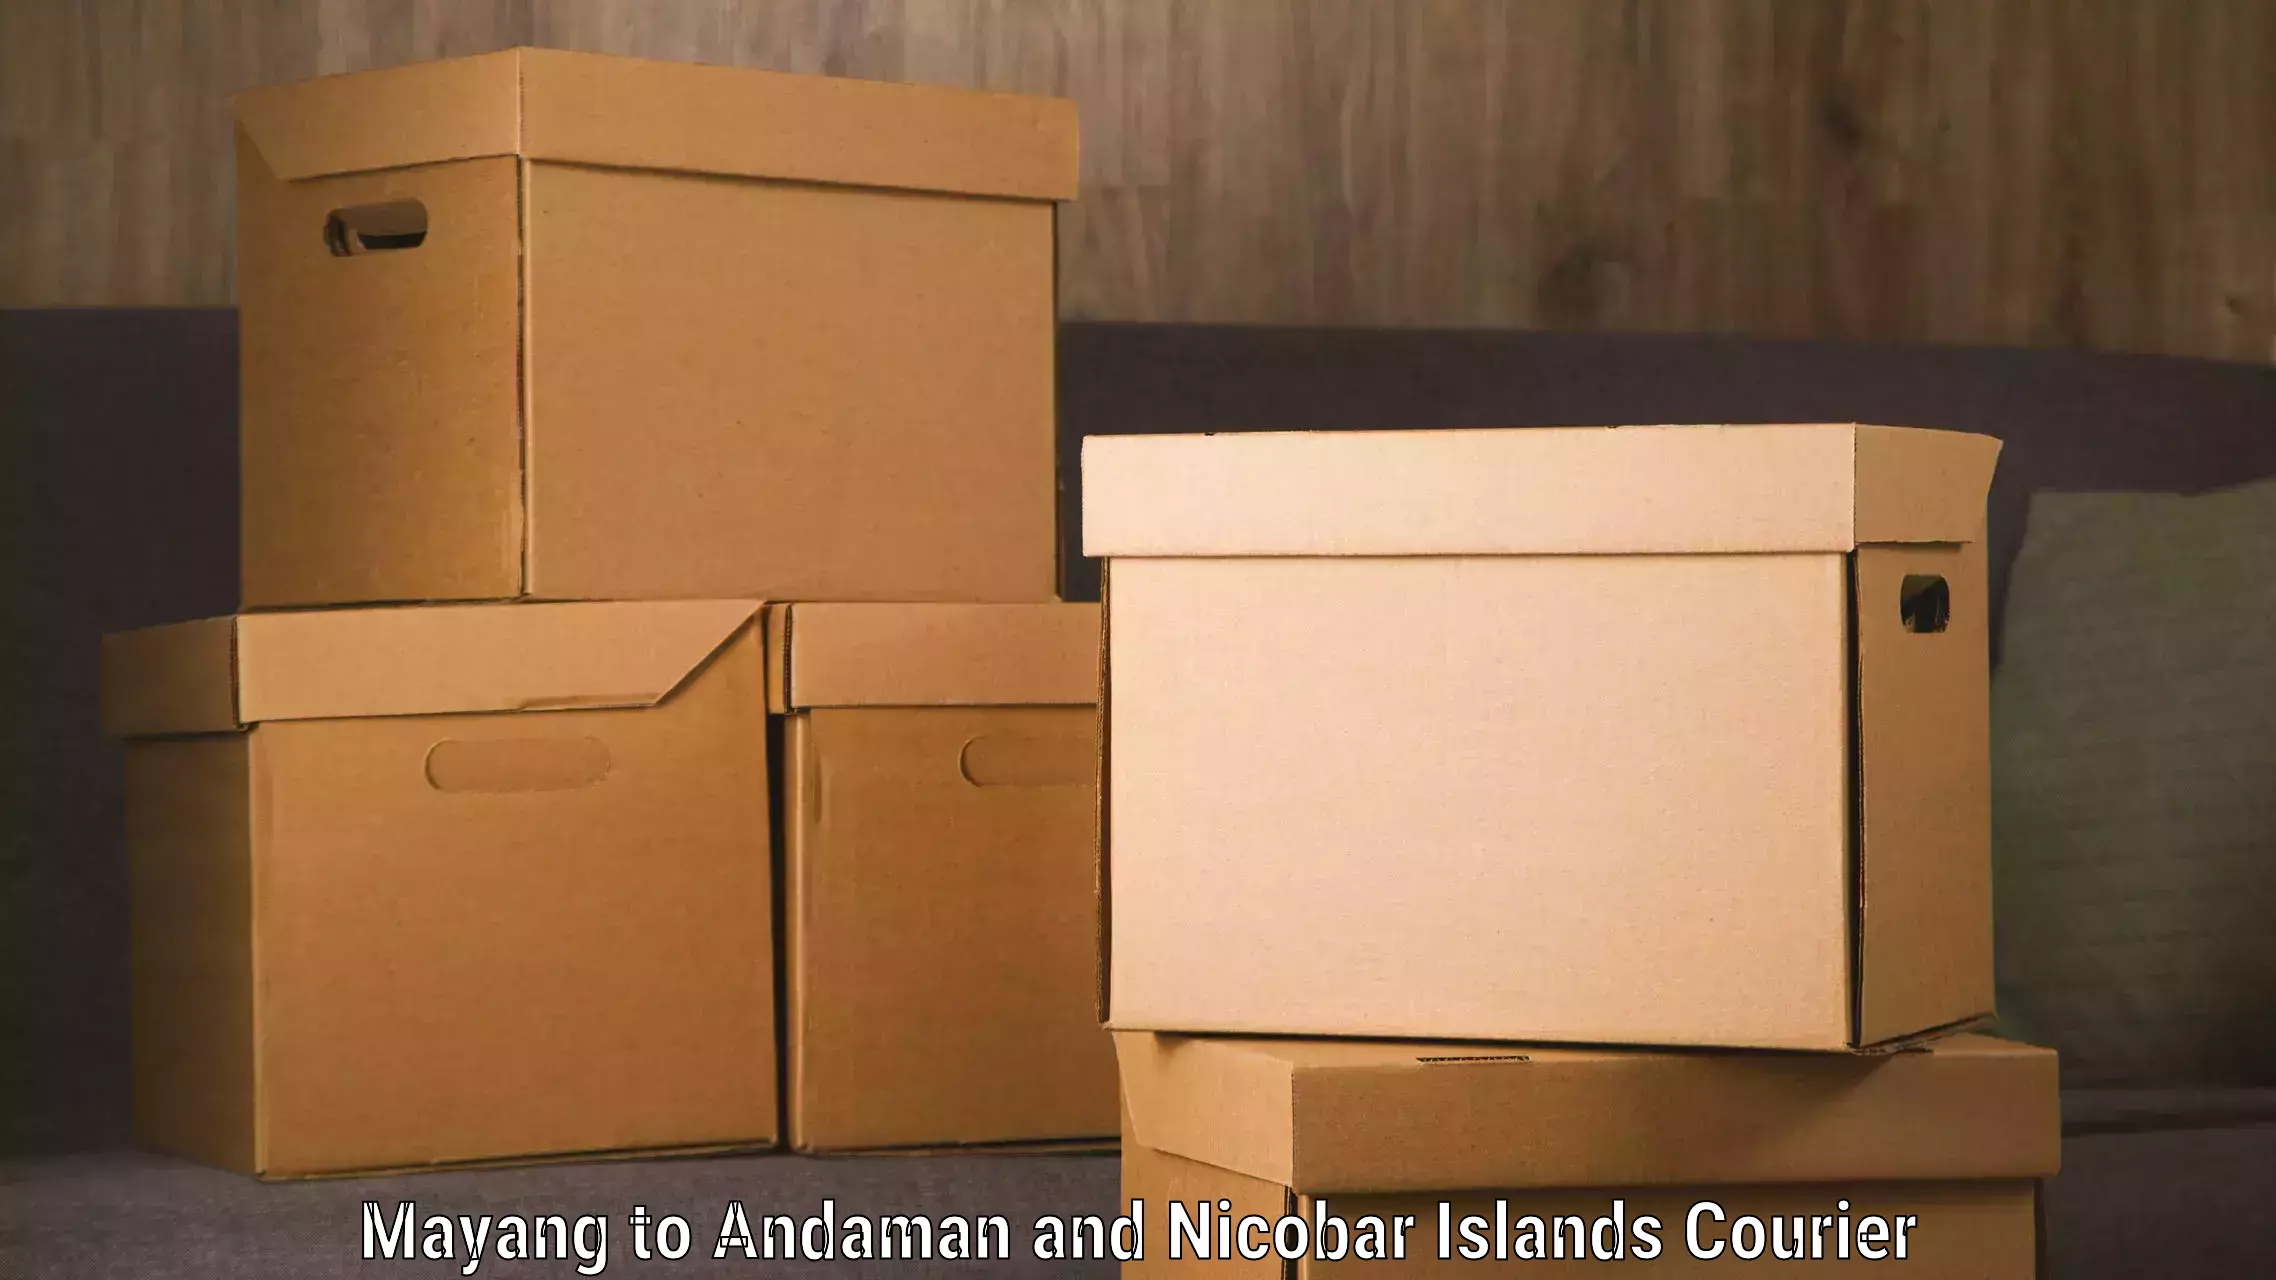 Simplified luggage transport in Mayang to Andaman and Nicobar Islands